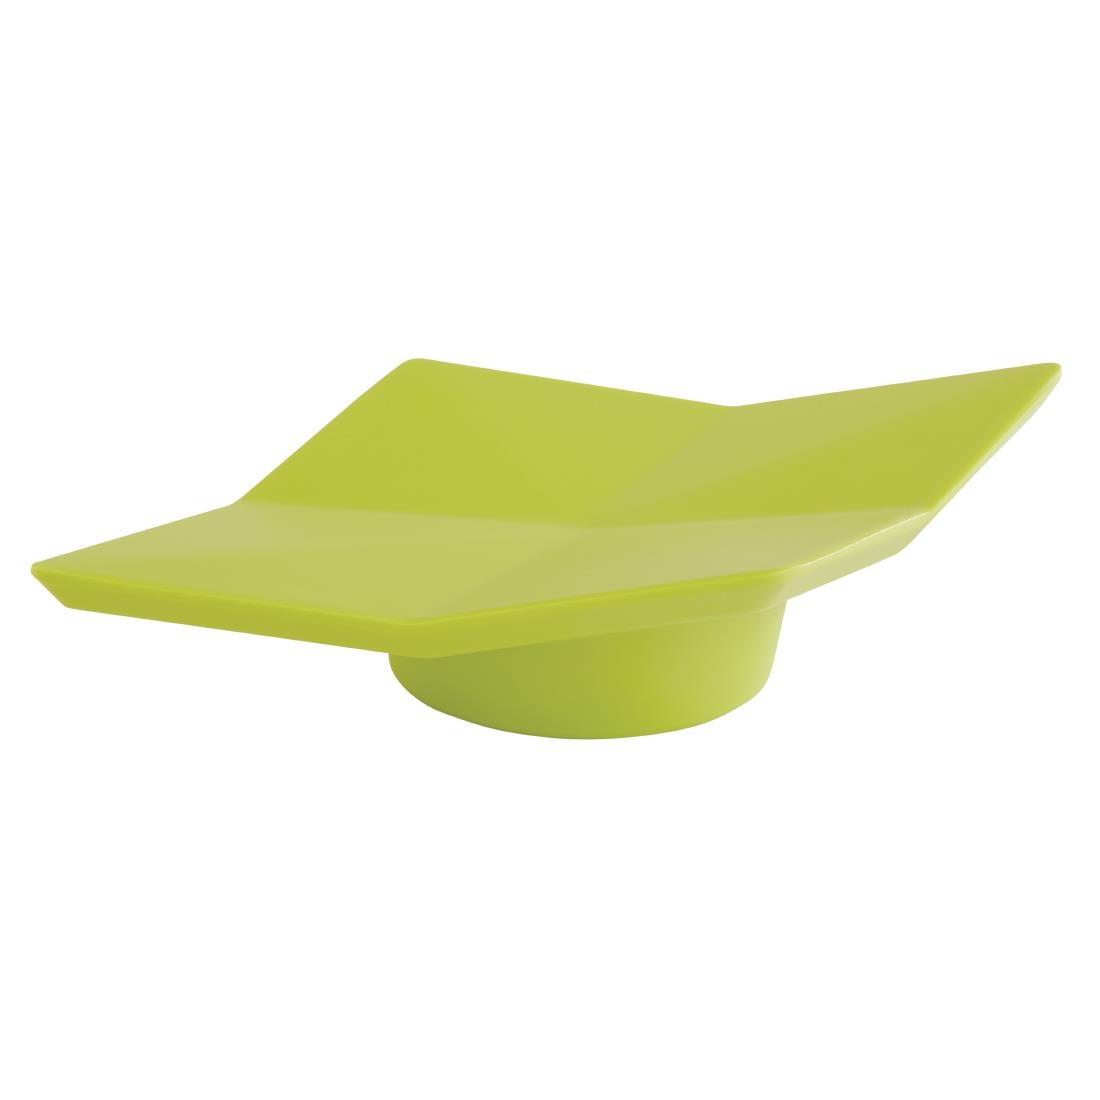 APS+ Small Lotus Leaf Plate Yellow Green 150mm - Each - DT792 - 1